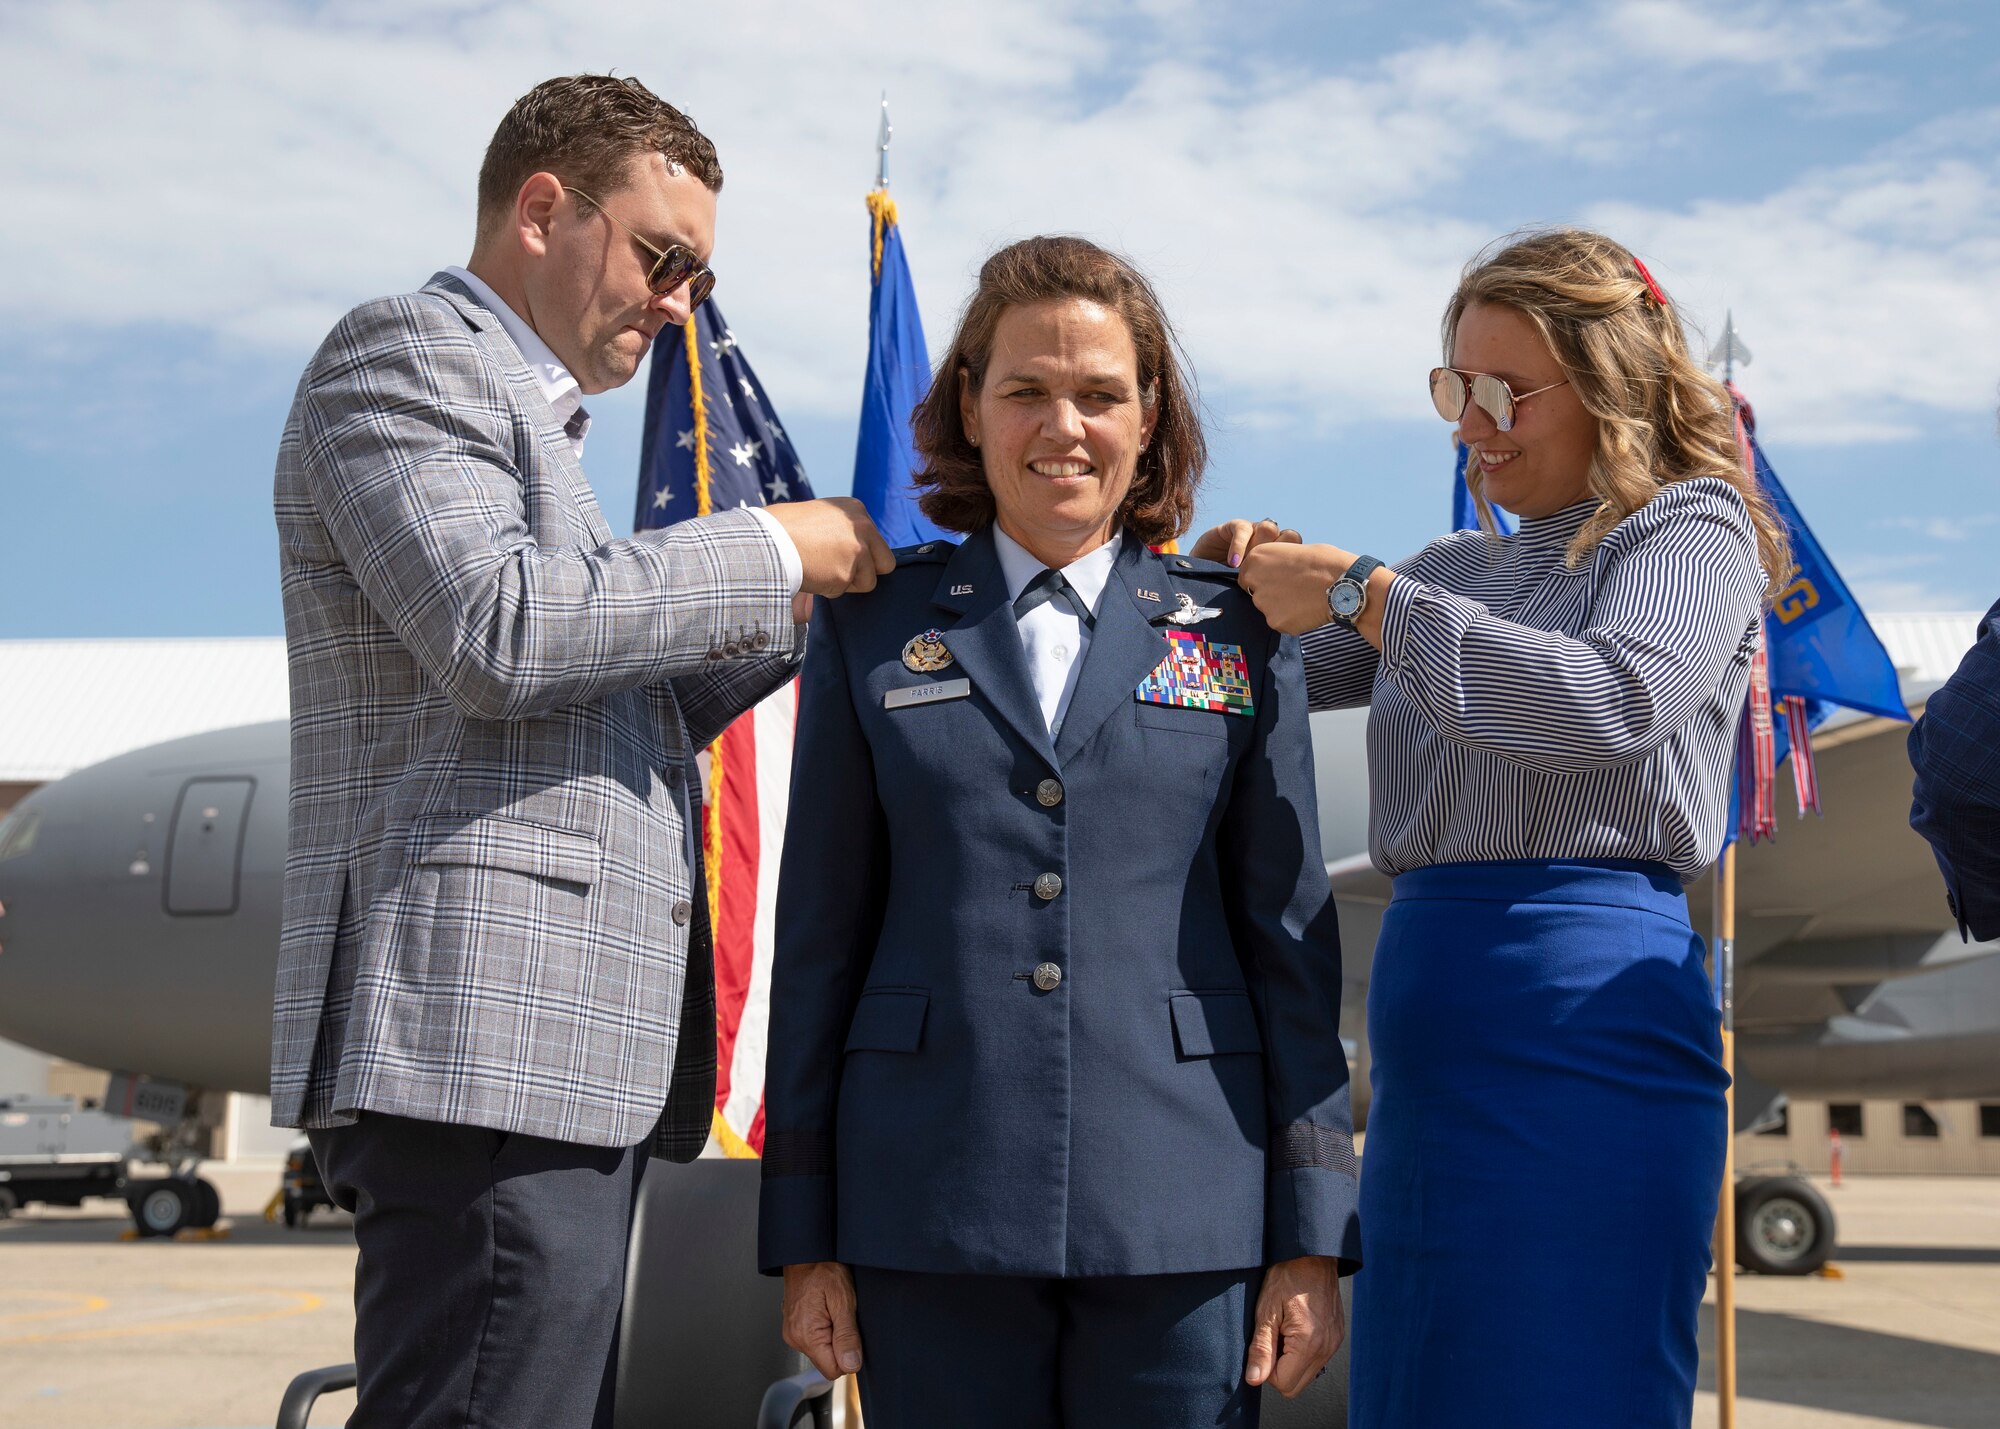 Newly promoted Maj. Gen. Laurie Farris' children, Drew and Taylor, pin stars to her uniform at a promotion ceremony held May 15 at Pease Air National Guard Base. Farris is assuming a position as the assistant to the commander of Air Mobility Command, Scott Air Force Base, Ill. Photo by Staff Sgt. Charles Johnston, NHNG Deputy State PAO.